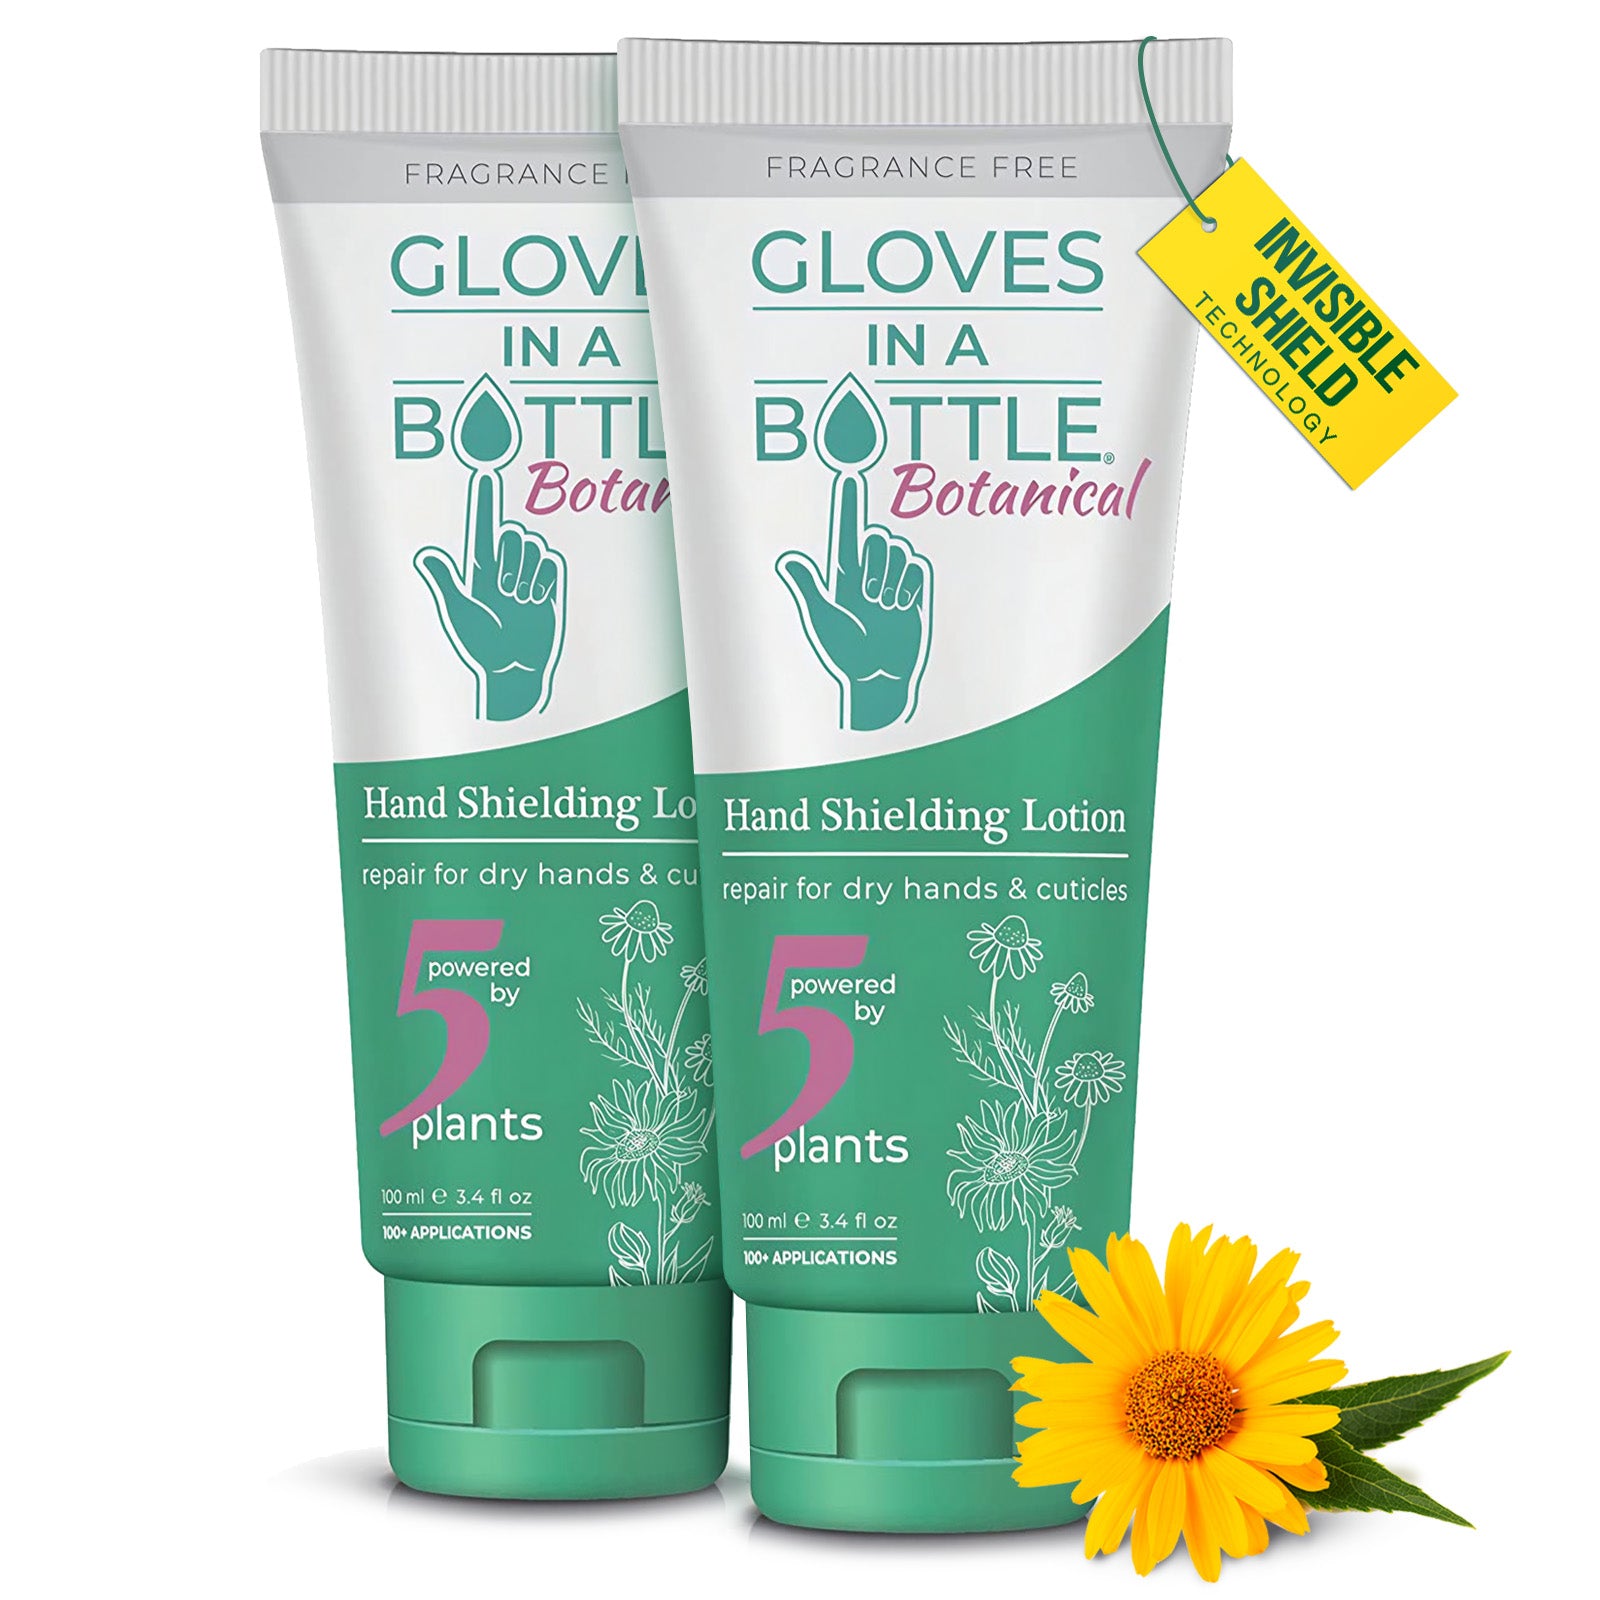 8 out of 10 consumers are loving our Gloves In A Bottle Shielding